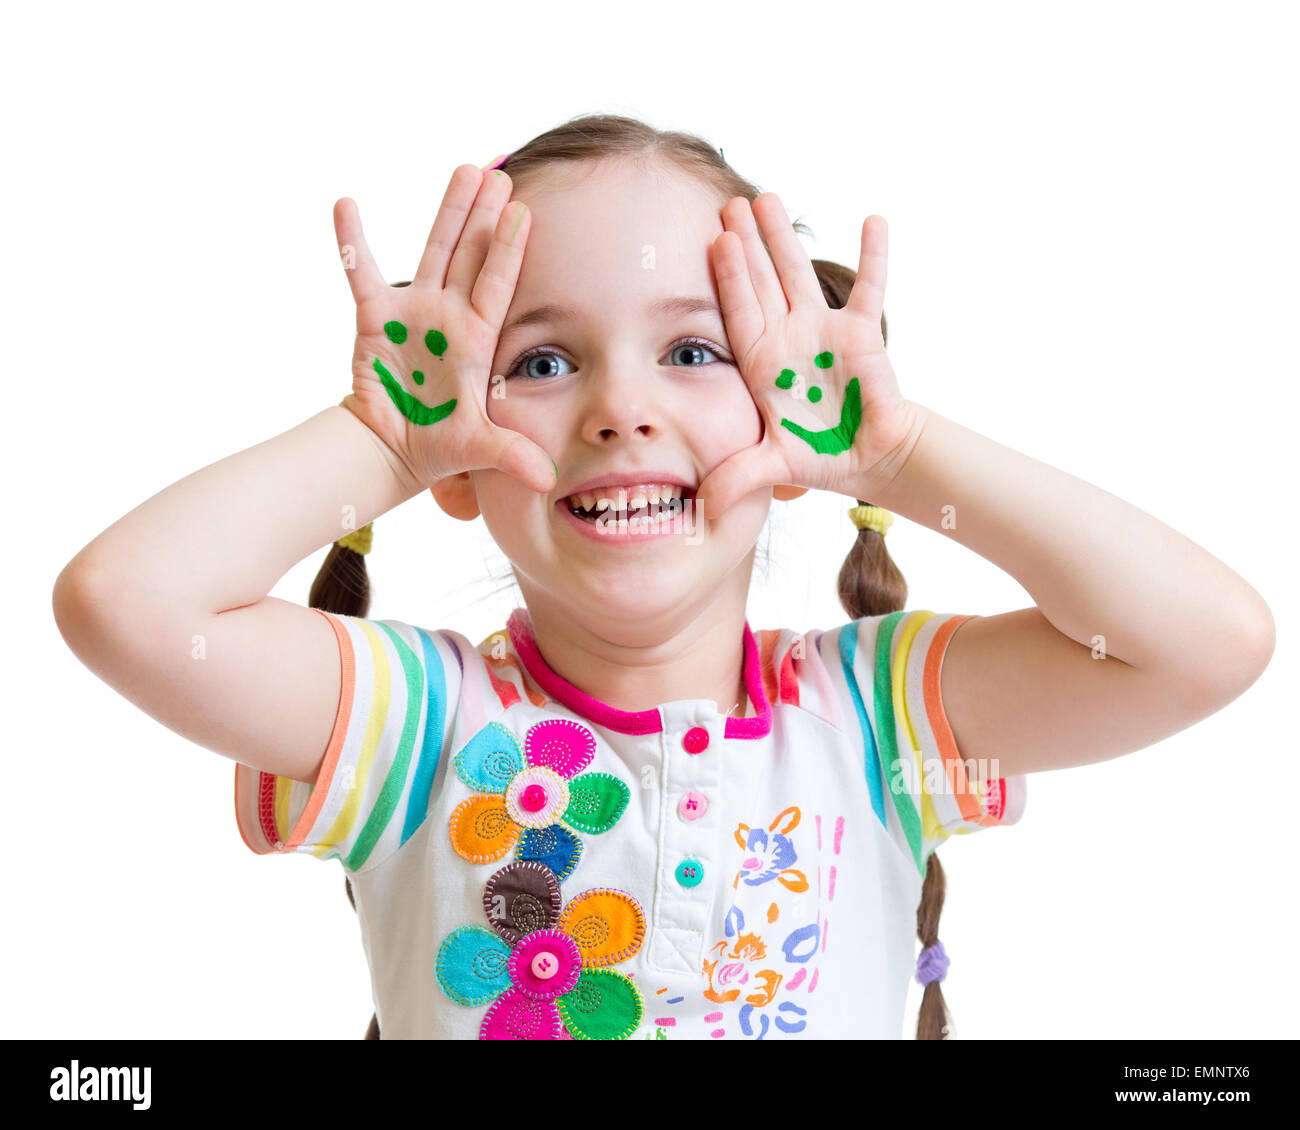 Happy kid girl showing painted hands with funny face Stock Photo